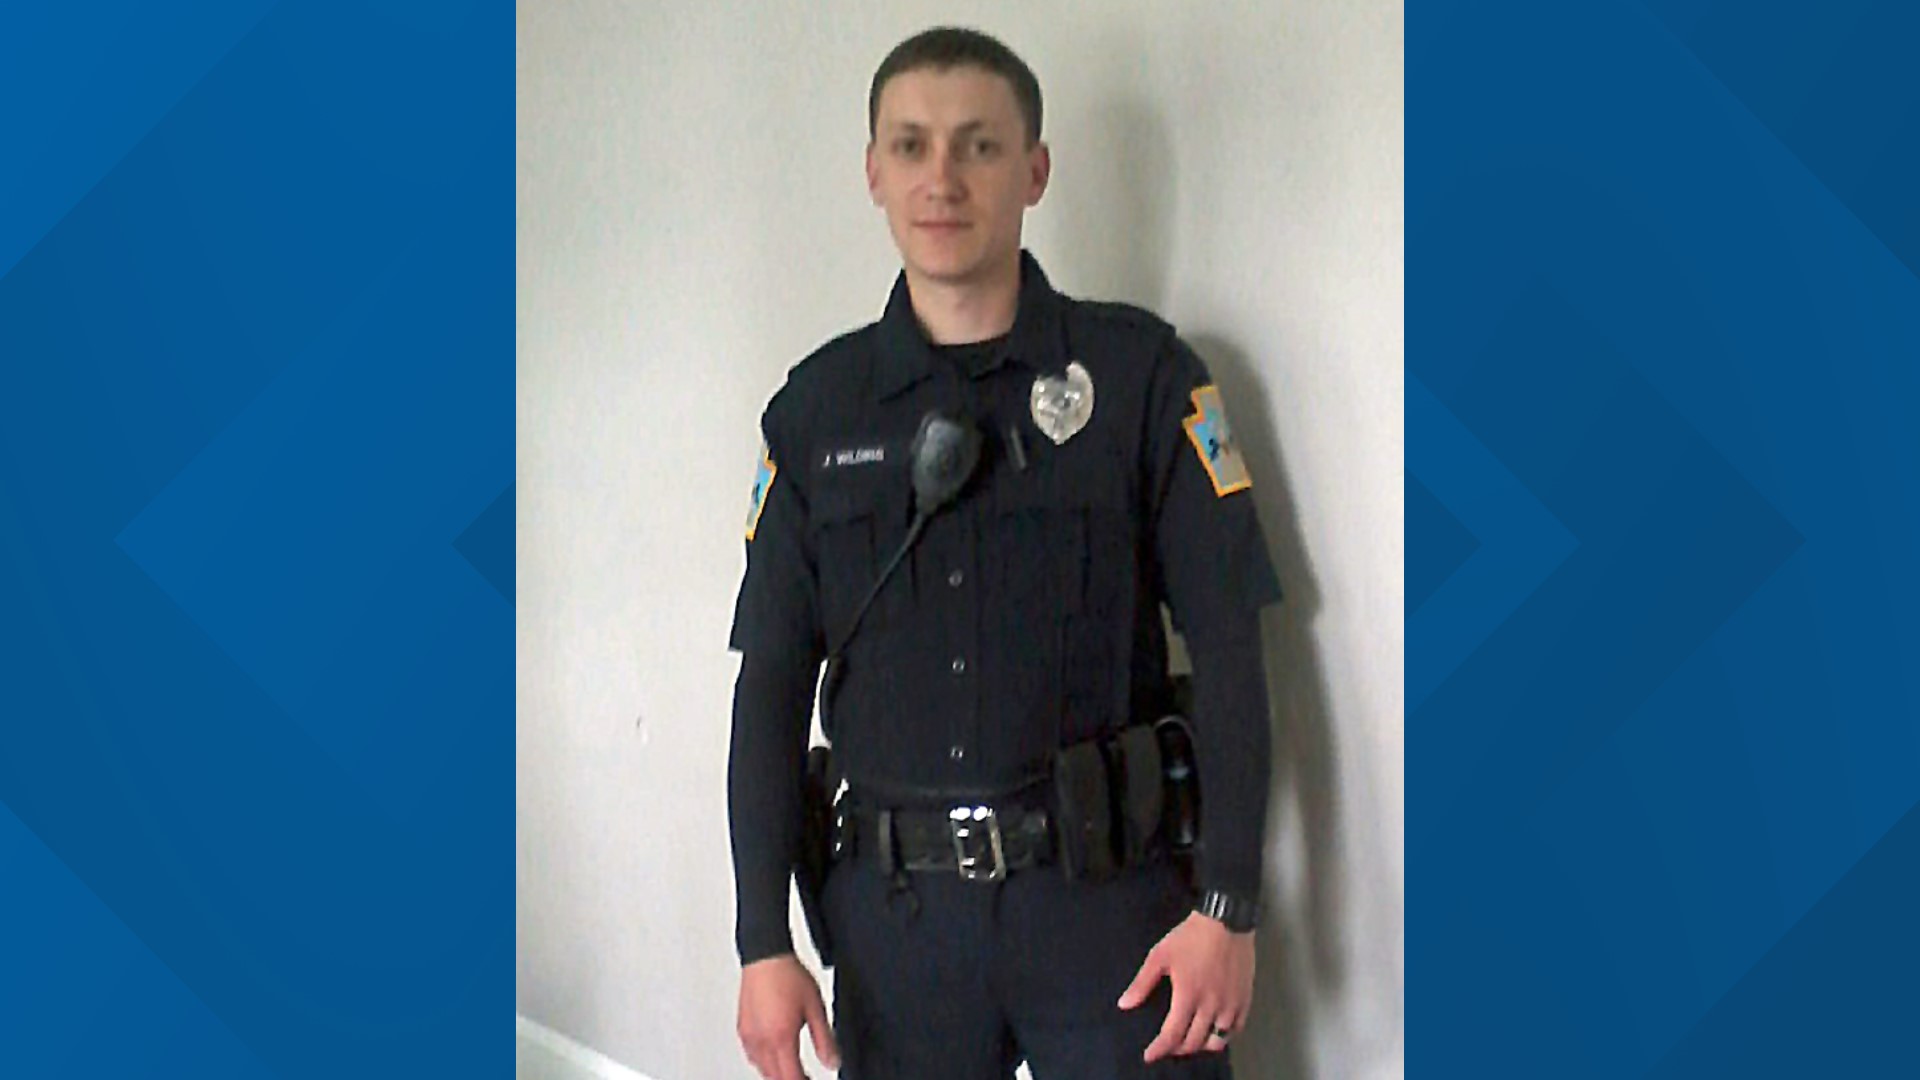 A new law targets suspects who flee from police on foot. The bill in honor of fallen Scranton Police Officer John Wilding received bipartisan support in Harrisburg.